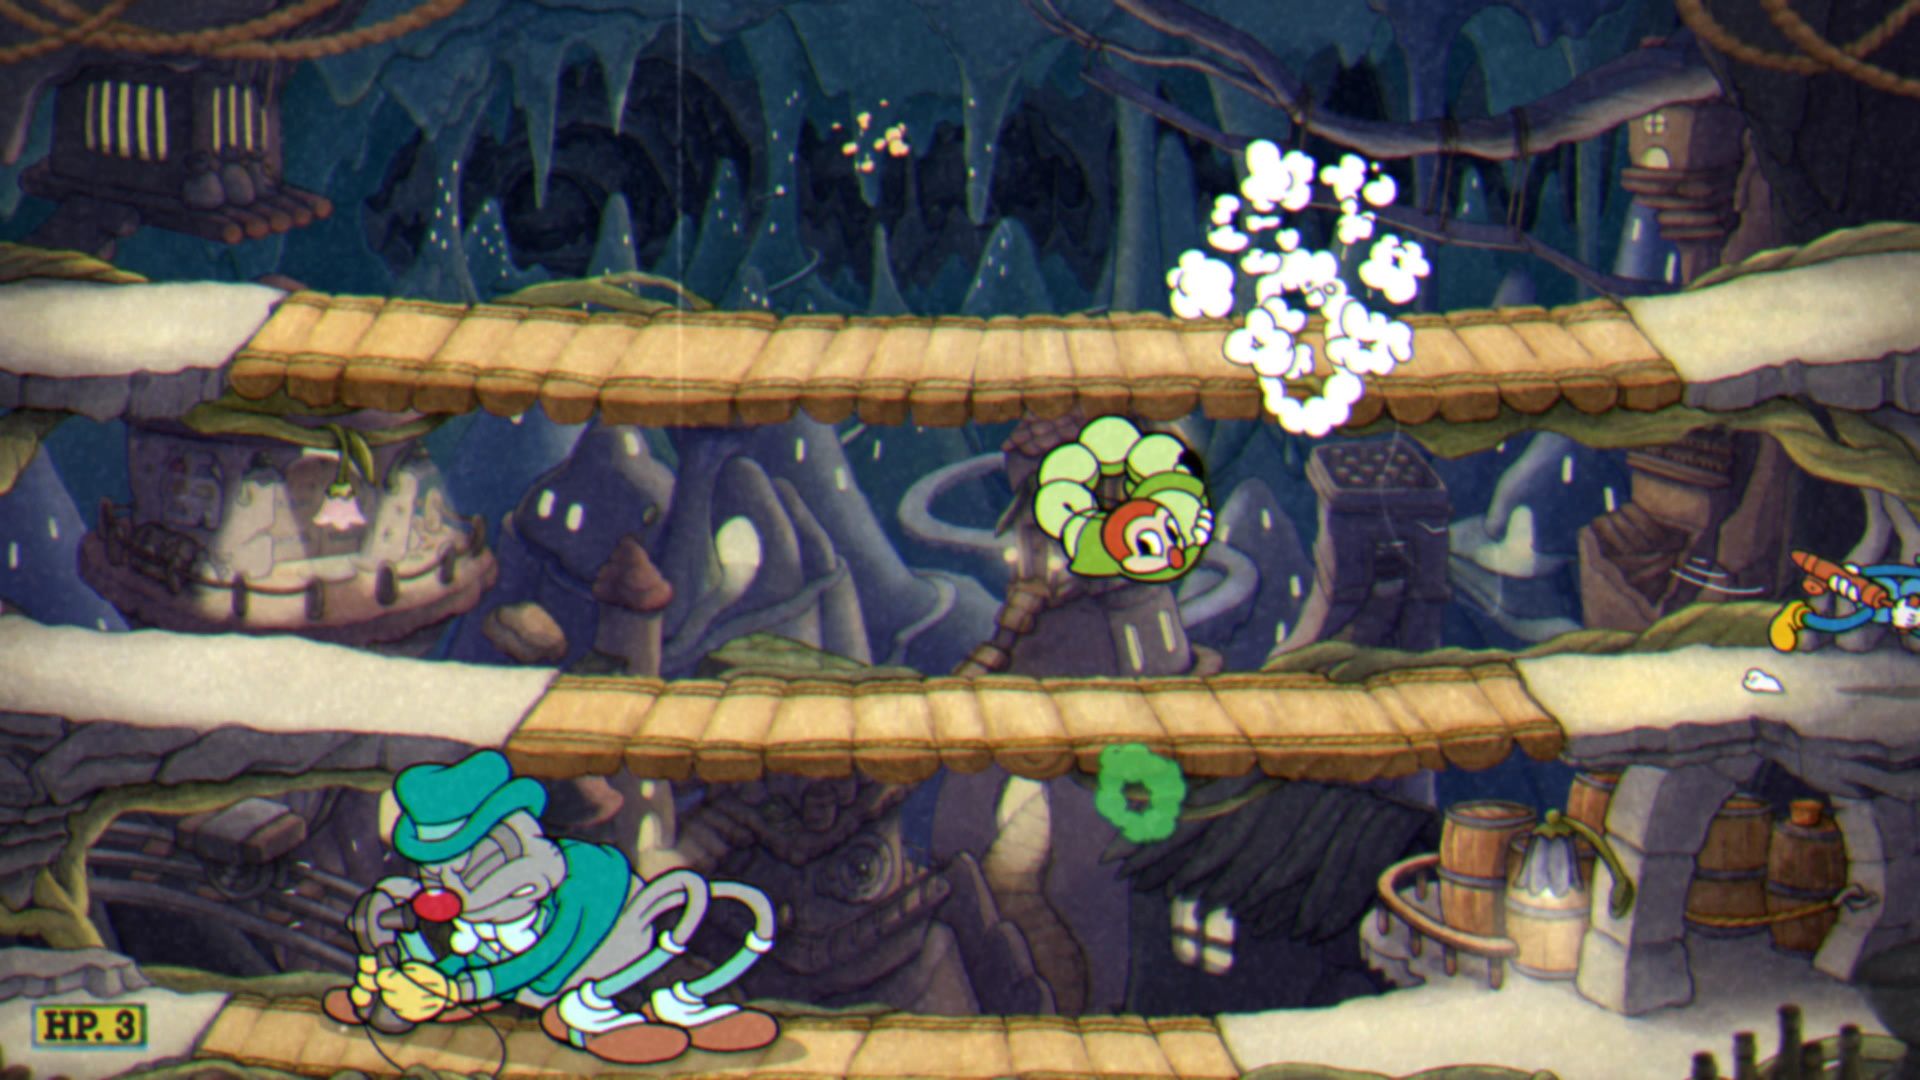 Cuphead The Delicious Course, The Moonshine Mob, Phase 1, Dodging with the smoke bomb